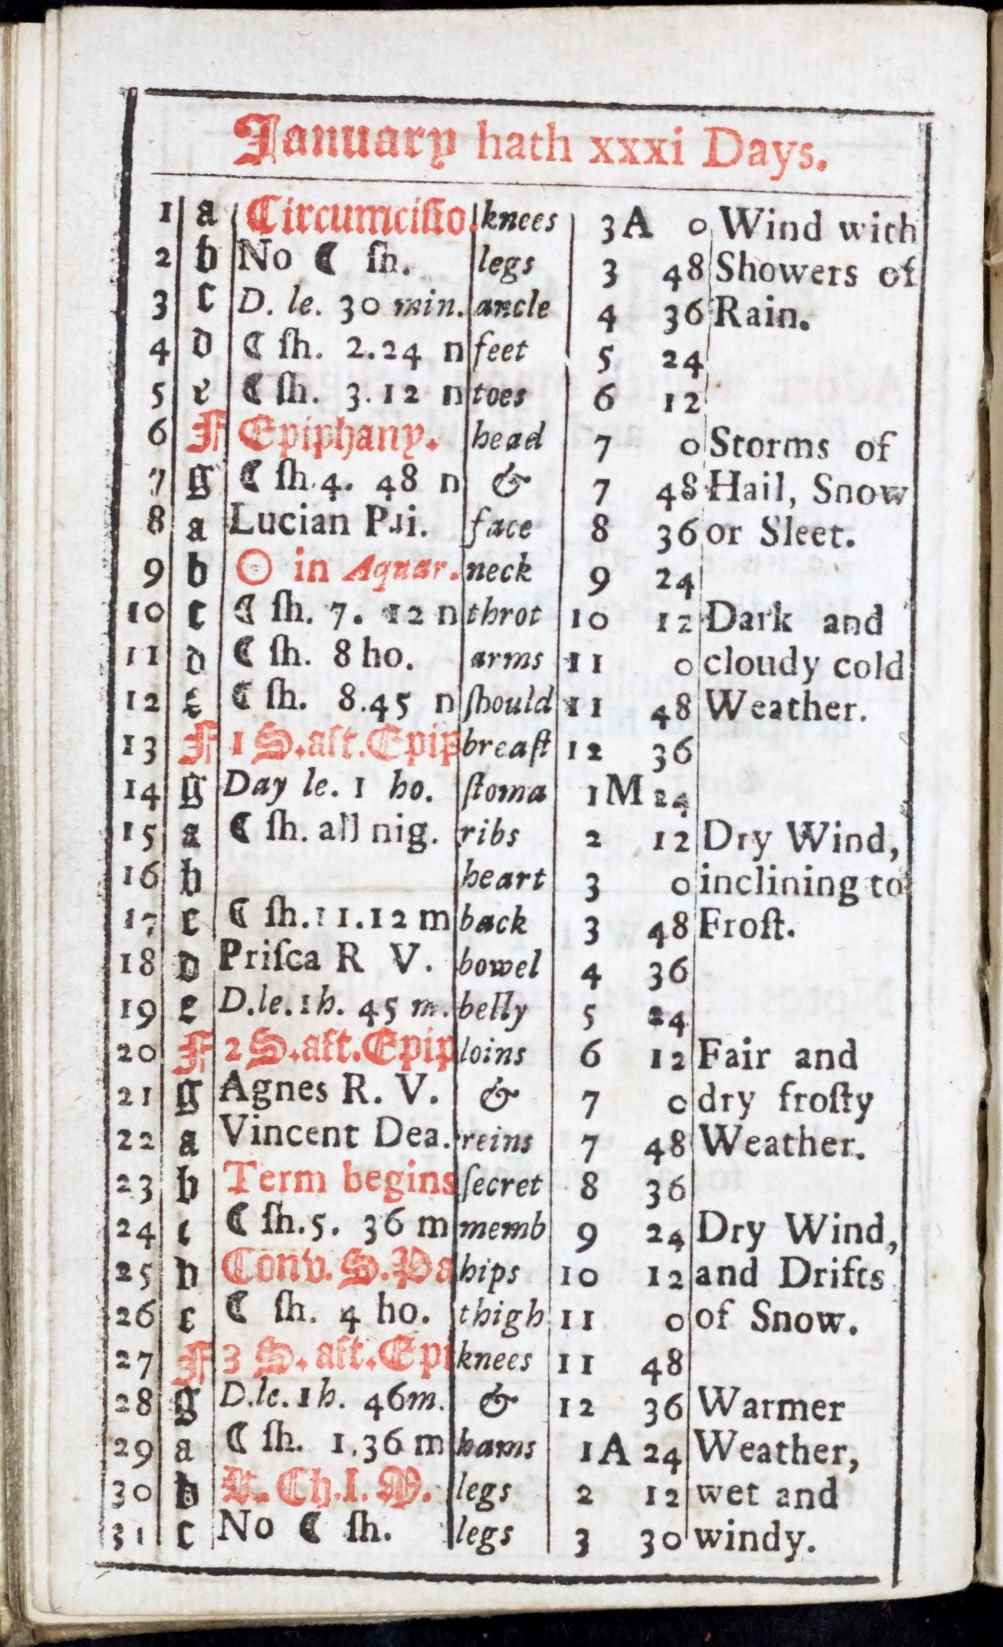 A second page from an almanac from 1717 containing a wealth of information, including not only a calendar, but also observations on the weather as well as astronomical and astrological facts.